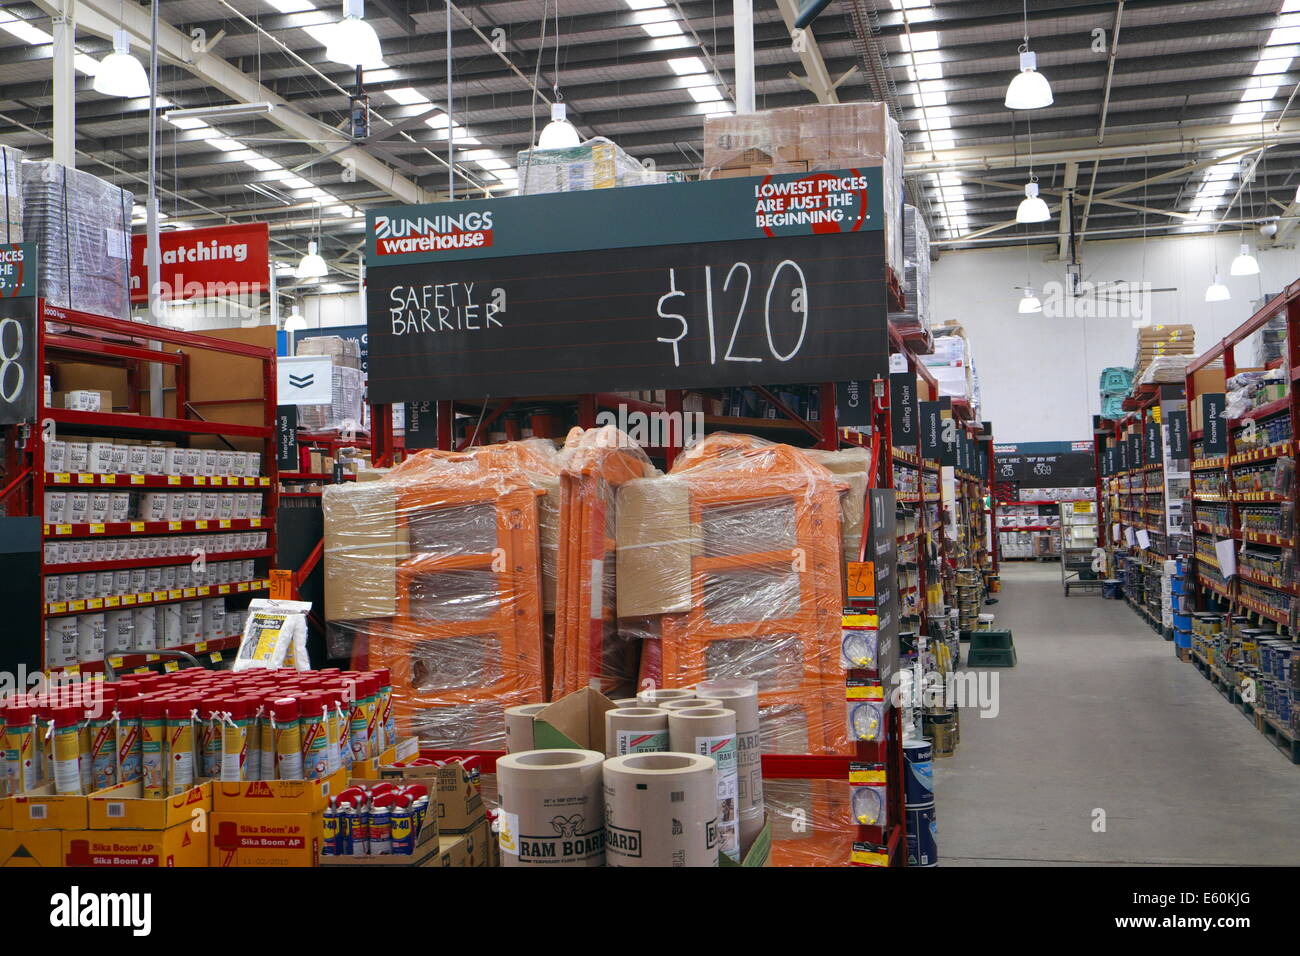 Bunnings is a national DIY retailer owned by wesfarmers, it sells tools, timber, equipment for builders and home owners, sydney Stock Photo